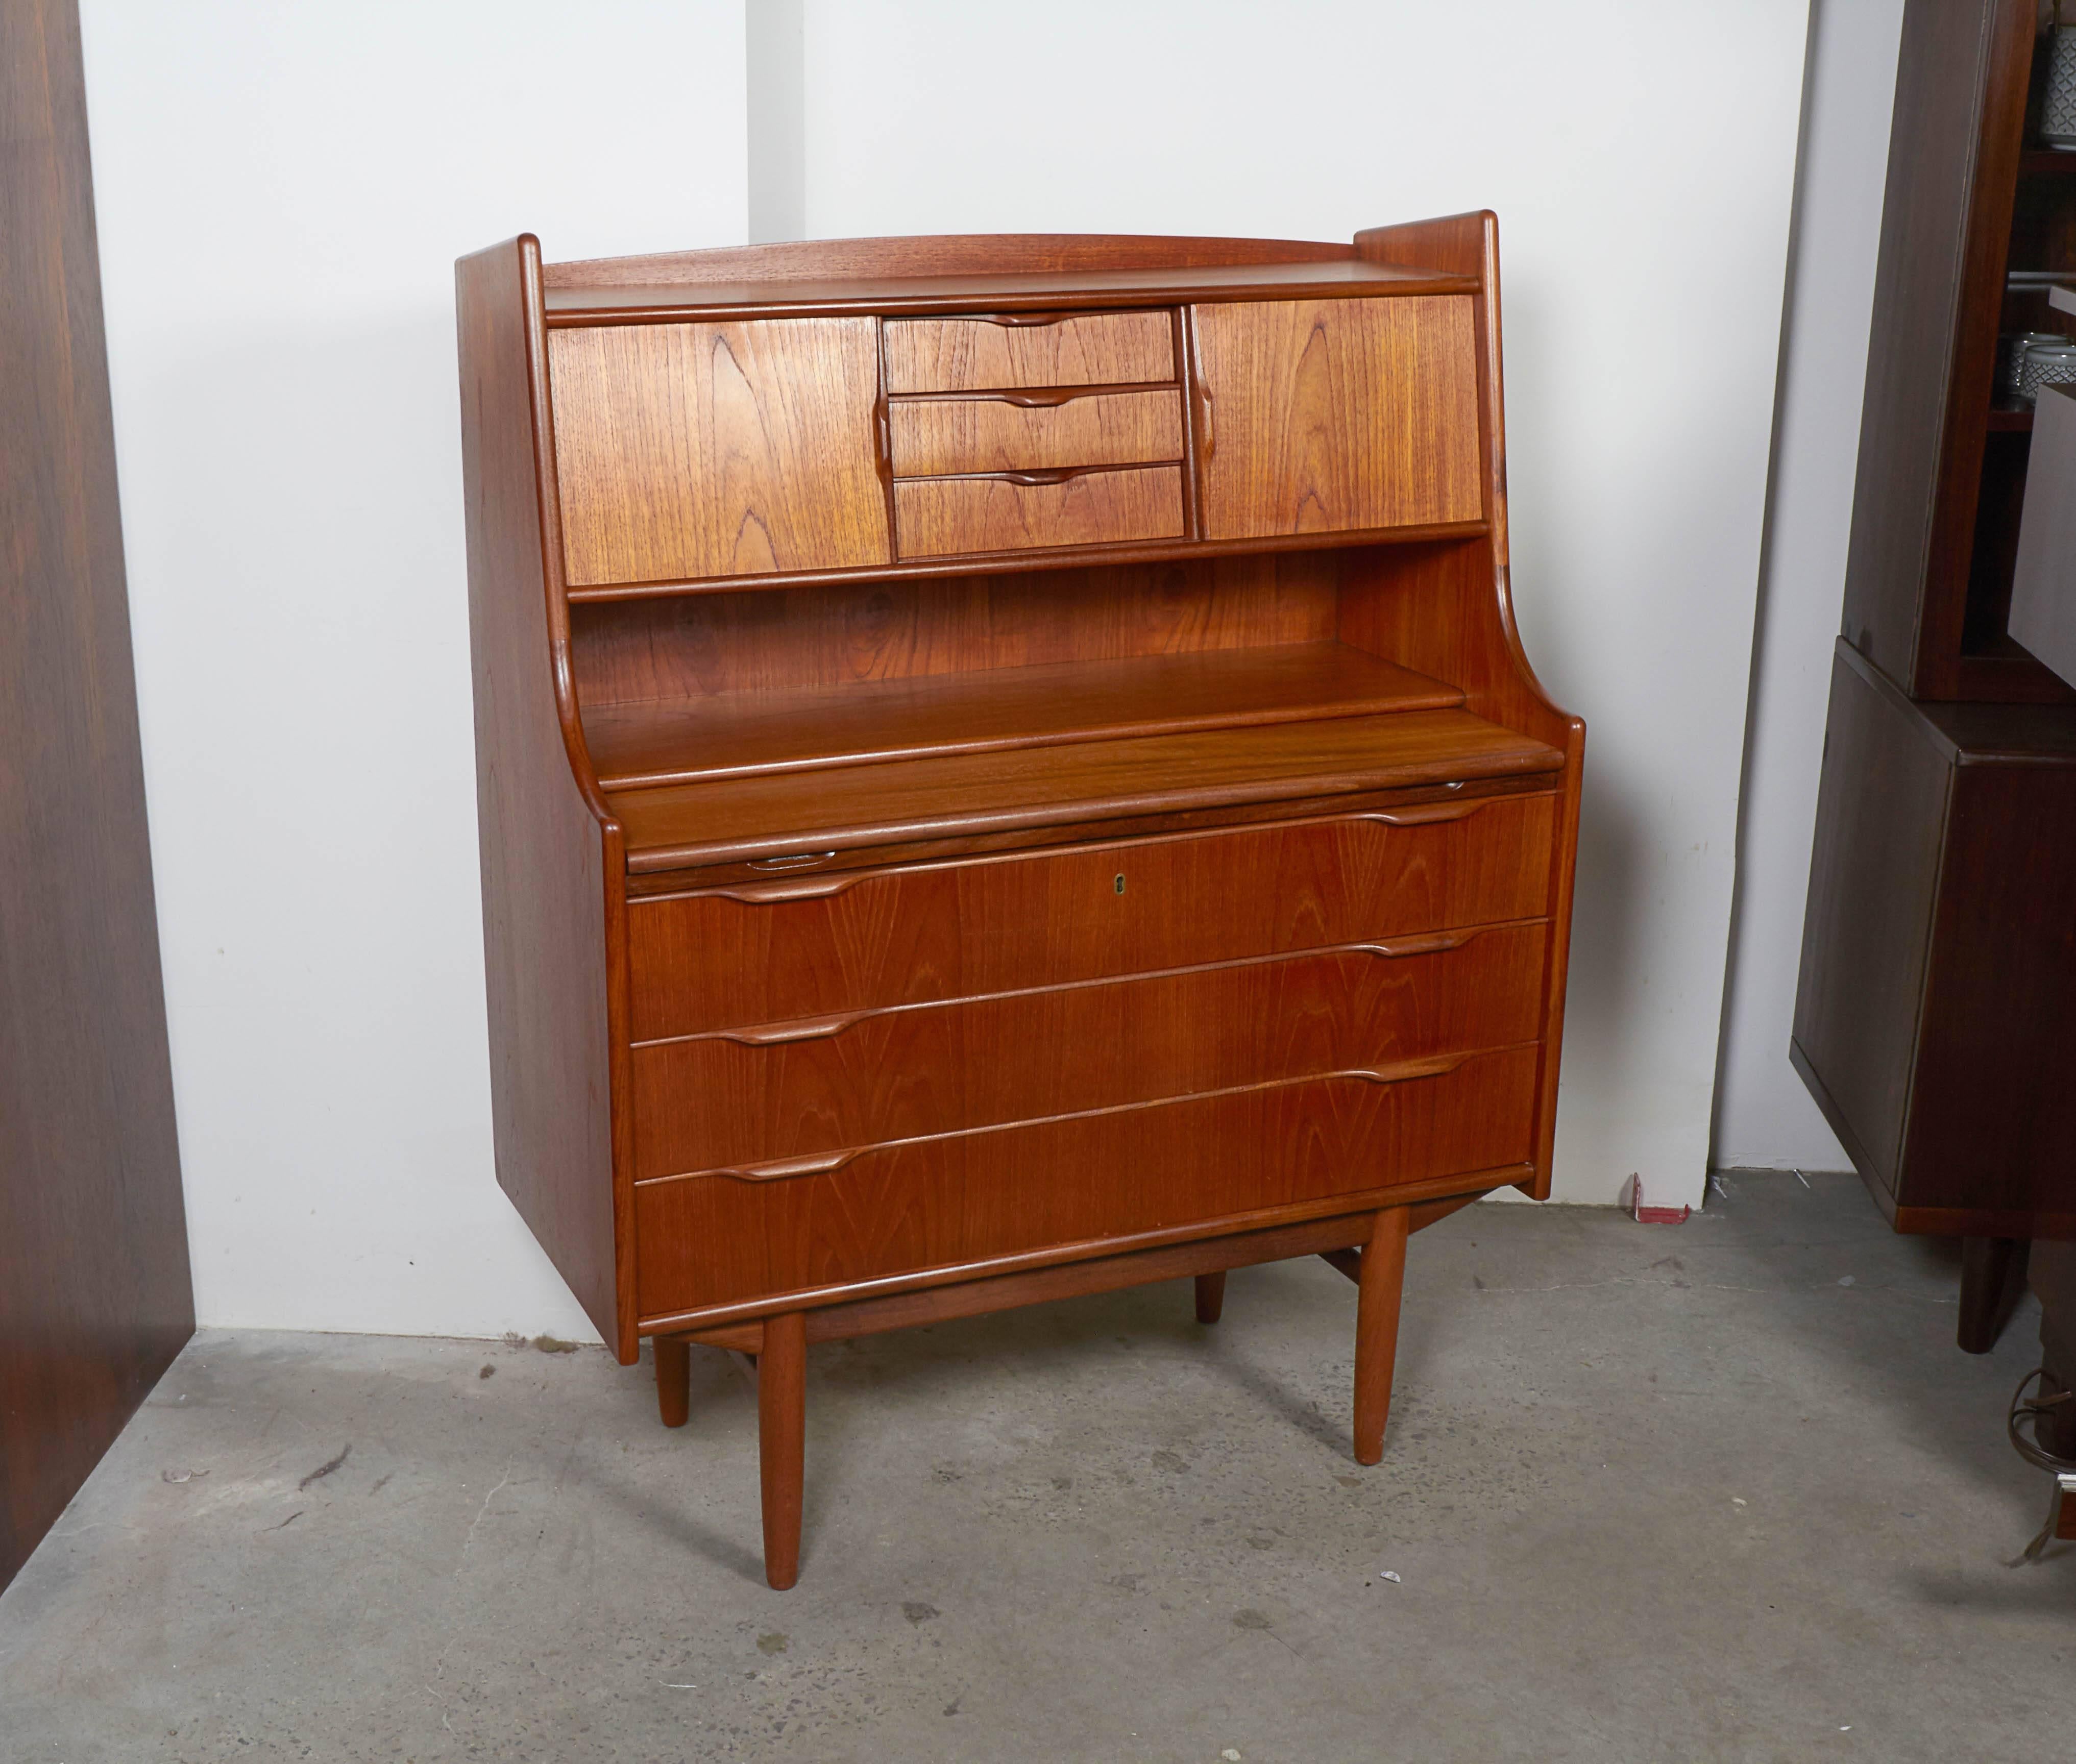 Vintage 1960s Danish Secretary Desk & Dresser

Excellent for use in a bedroom or guest room. The drawers are dresser size and the desk is a big added bonus. Small enough for any room. The depth of the secretary when the desk is pulled out is